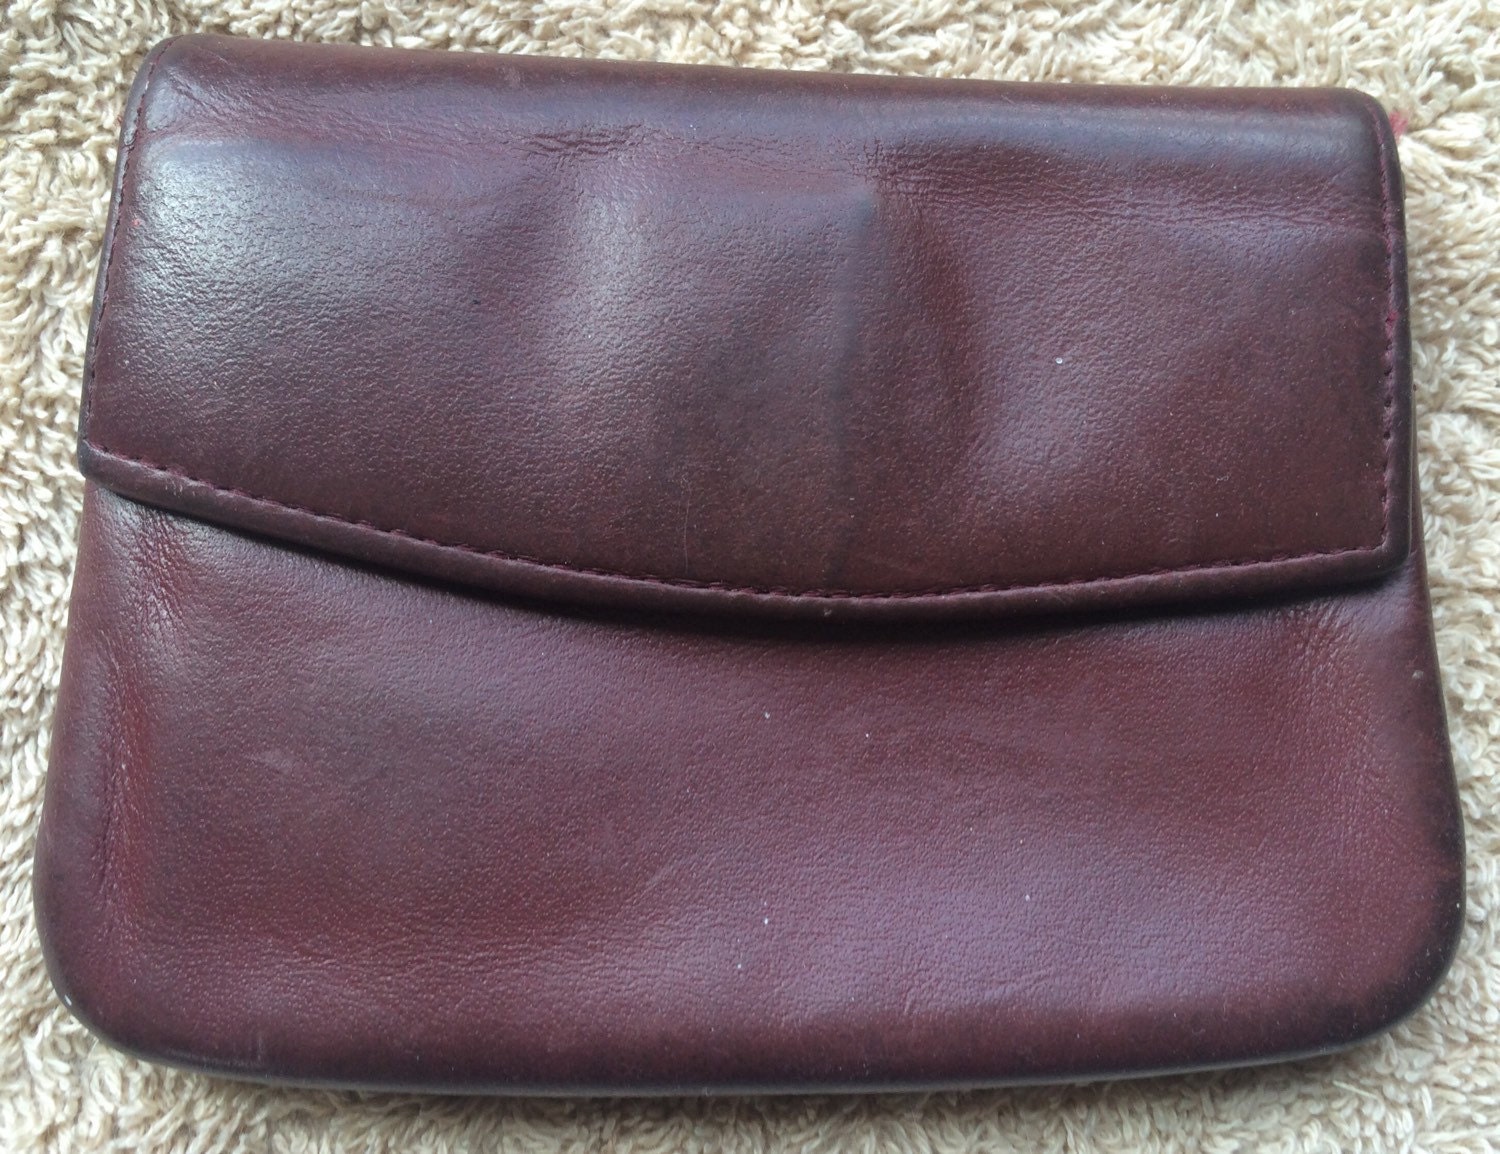 Vintage St Thomas Leather Coin Purse Wallet Burgundy Cowhide